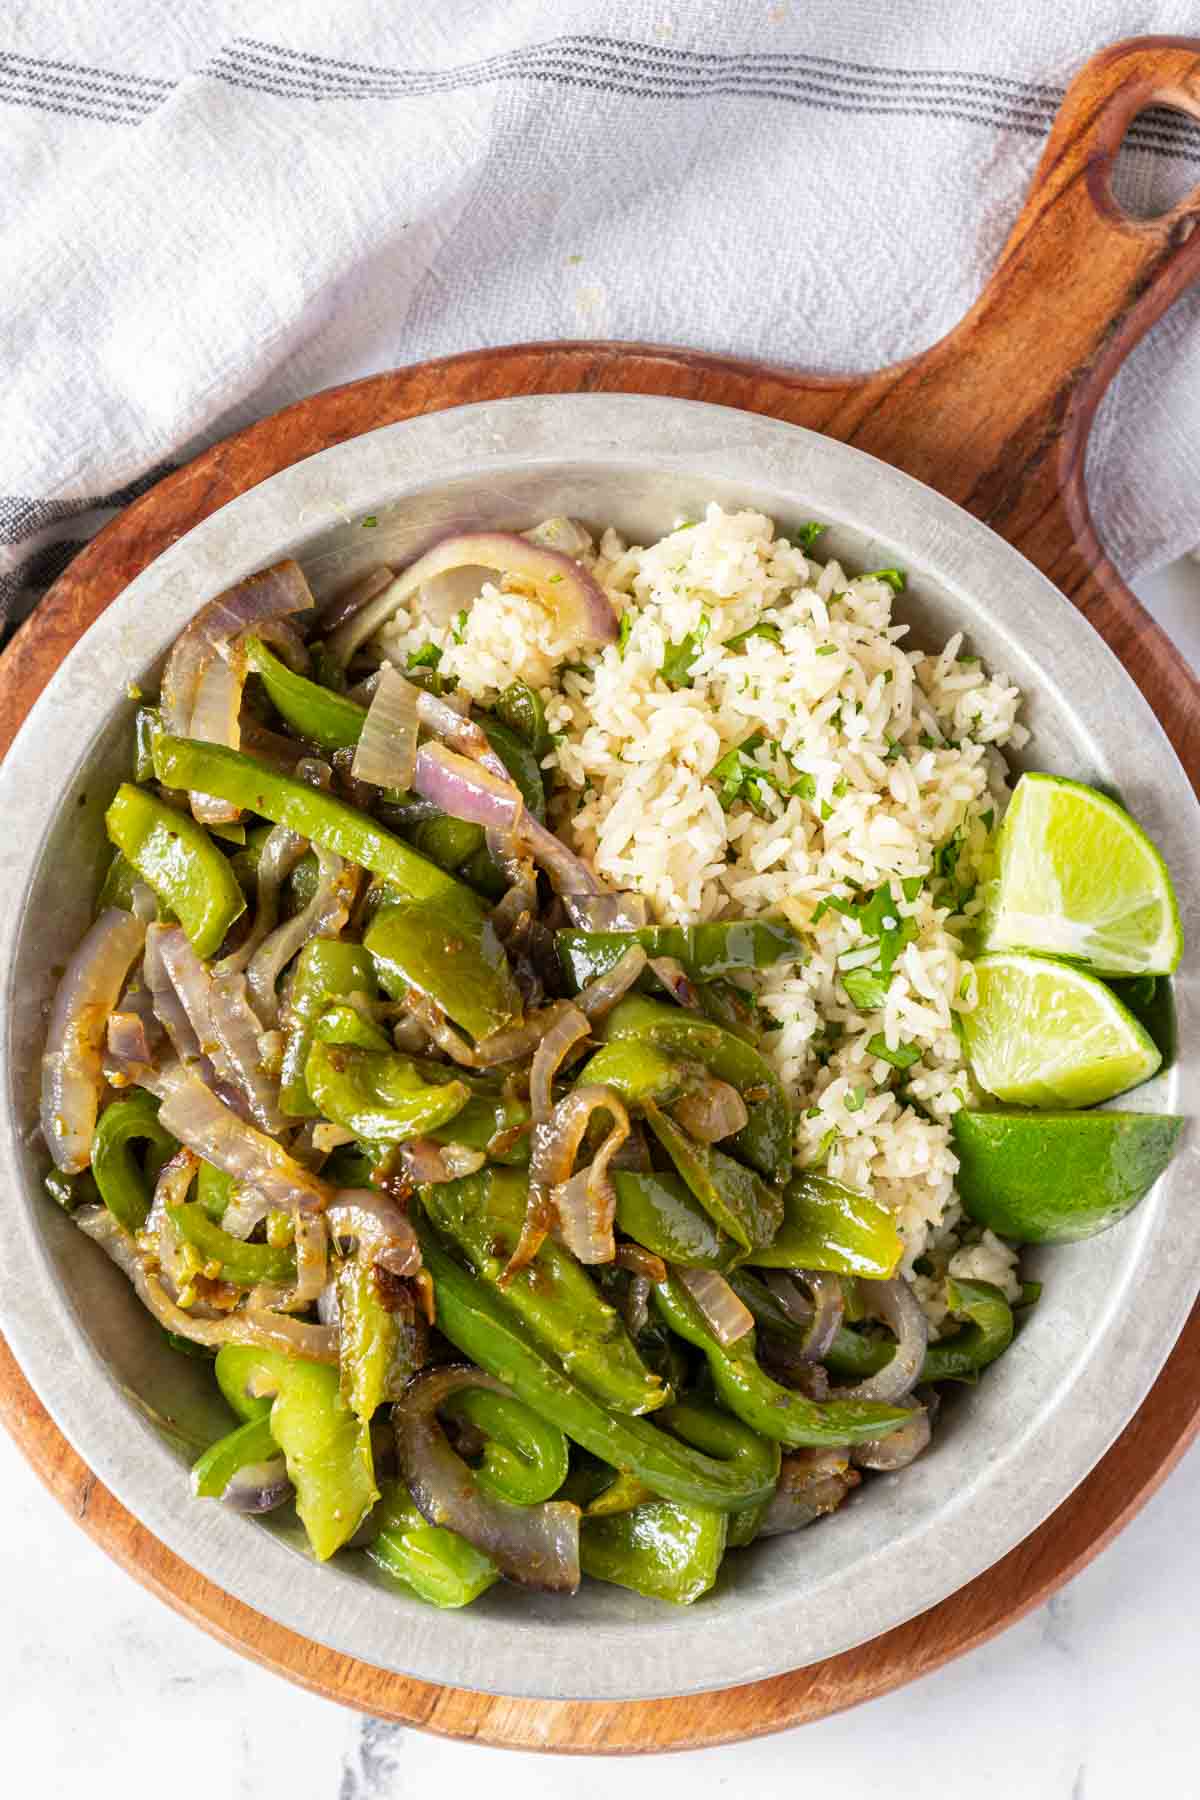 Green peppers and onions with rice, limes, and cilantro.